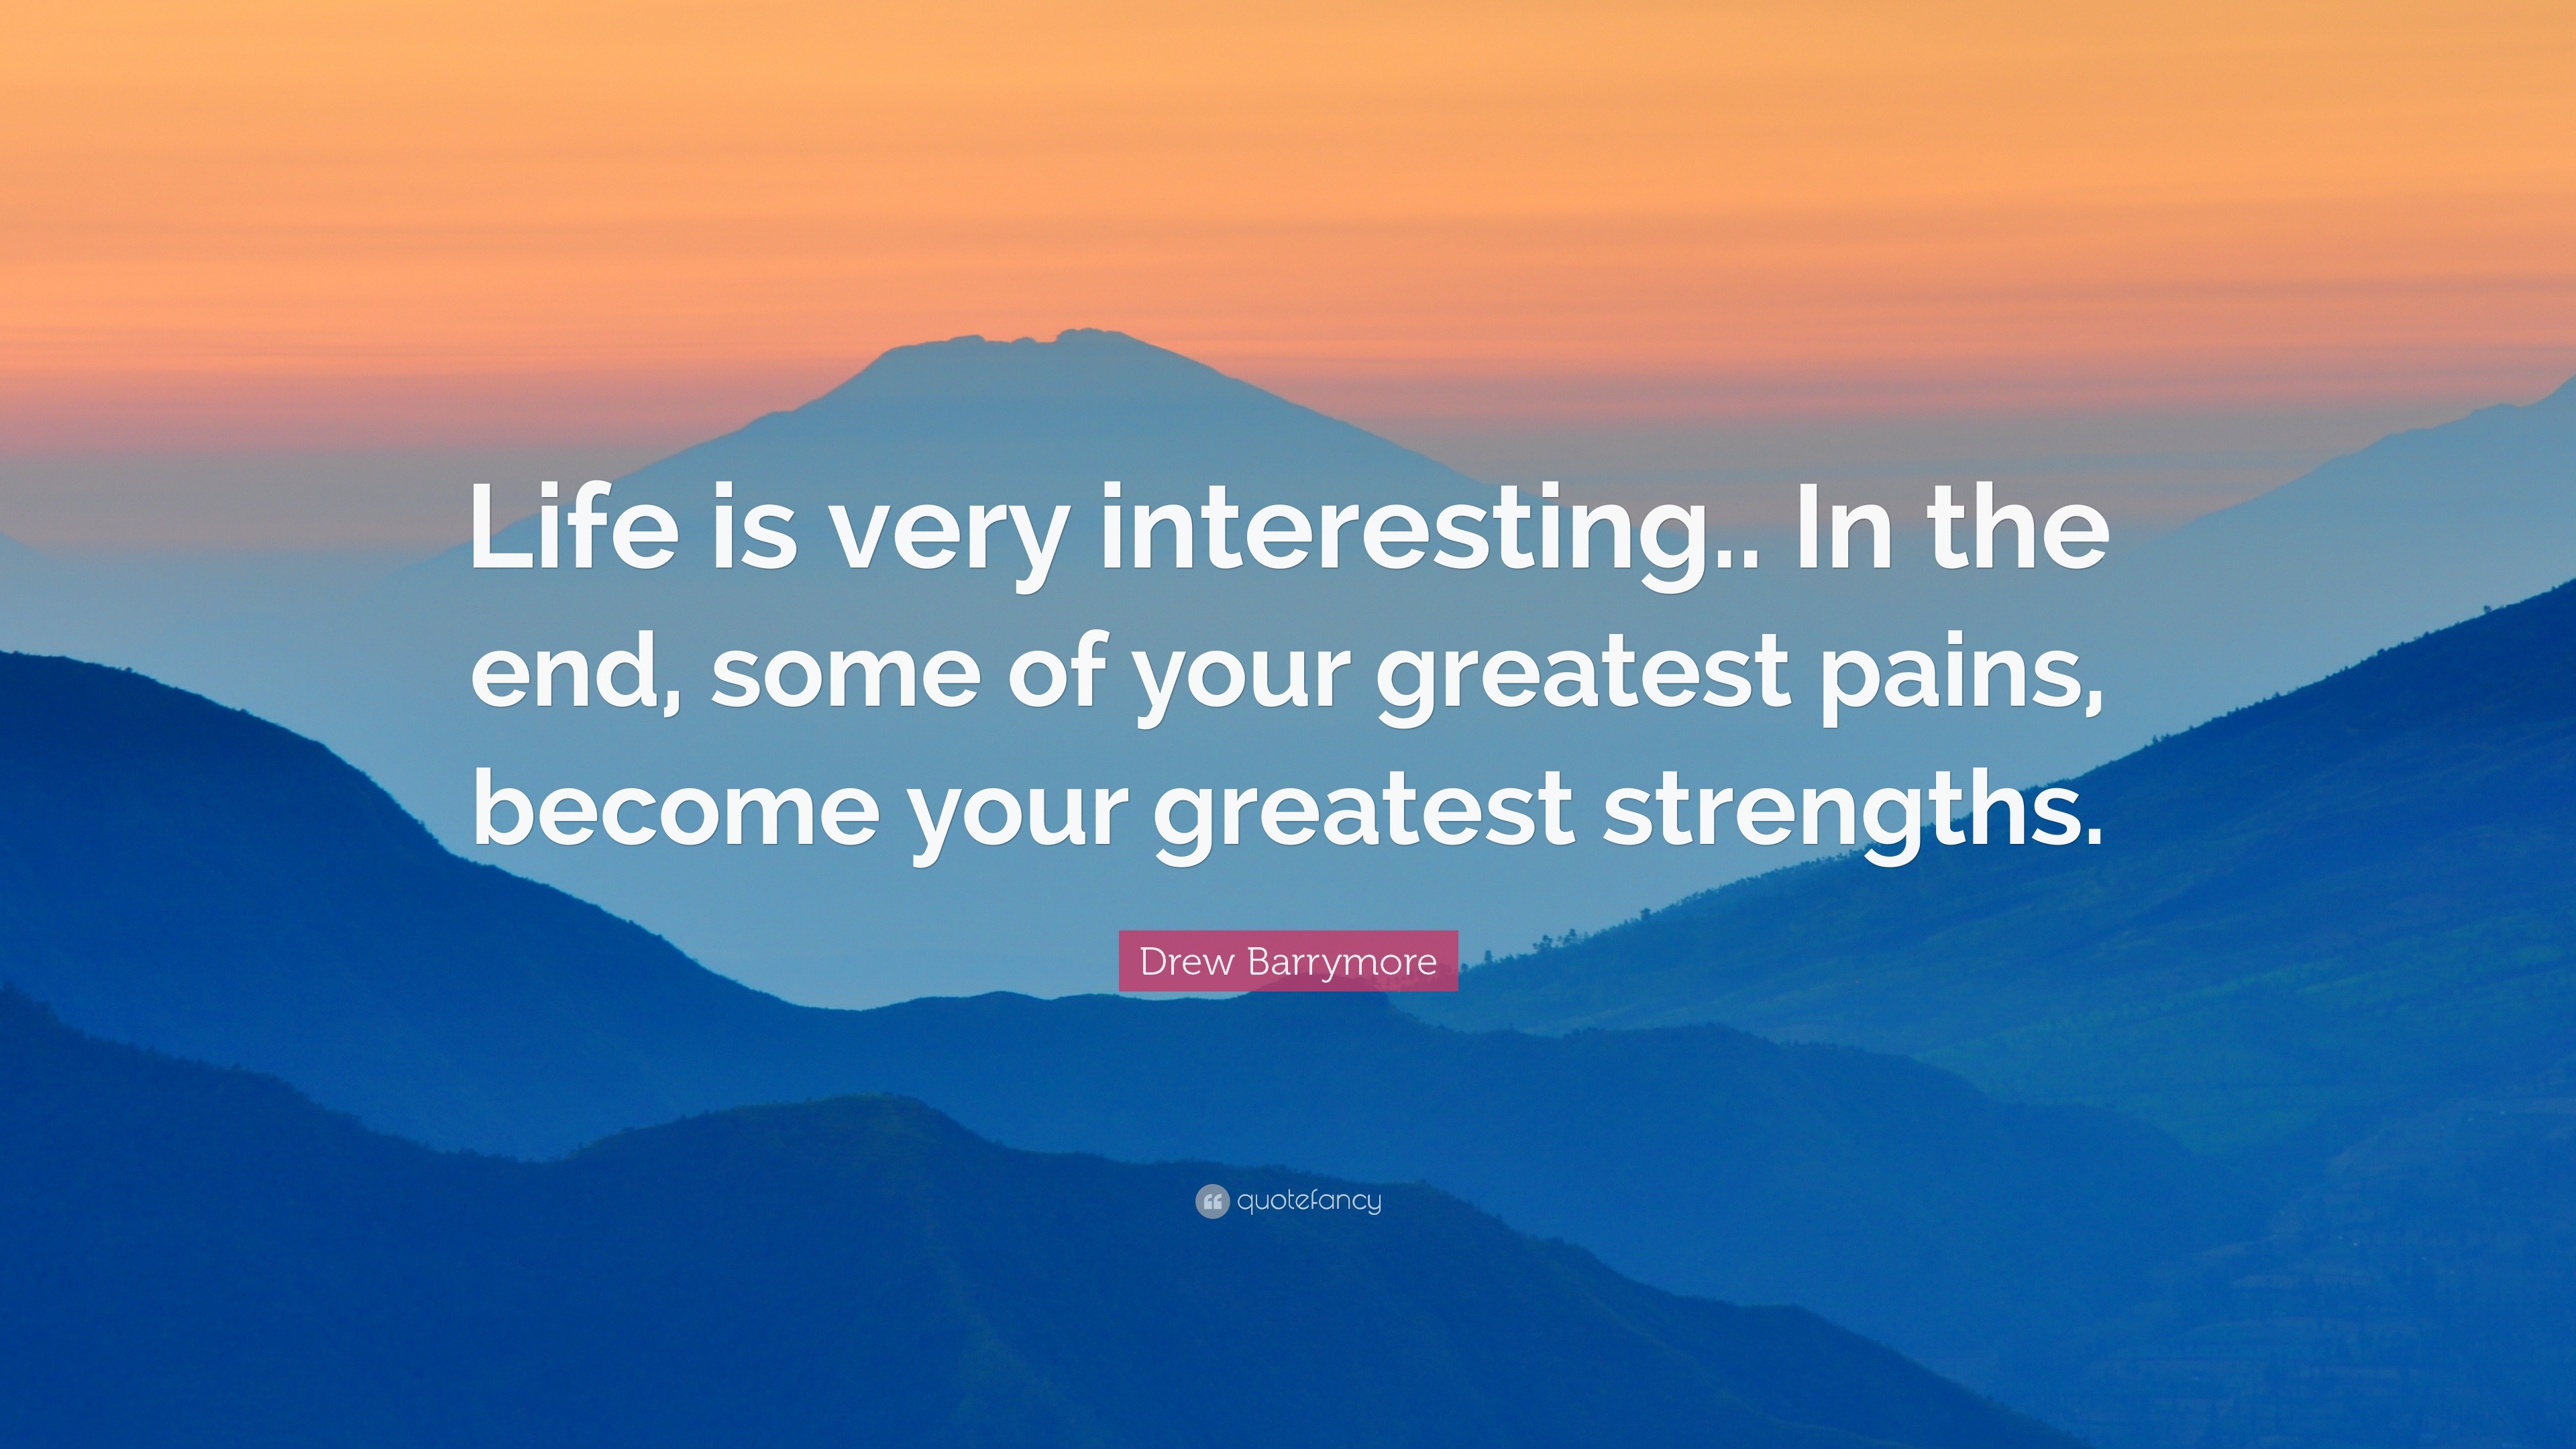 Drew Barrymore Quote: “Life is very interesting.. In the end, some of ...